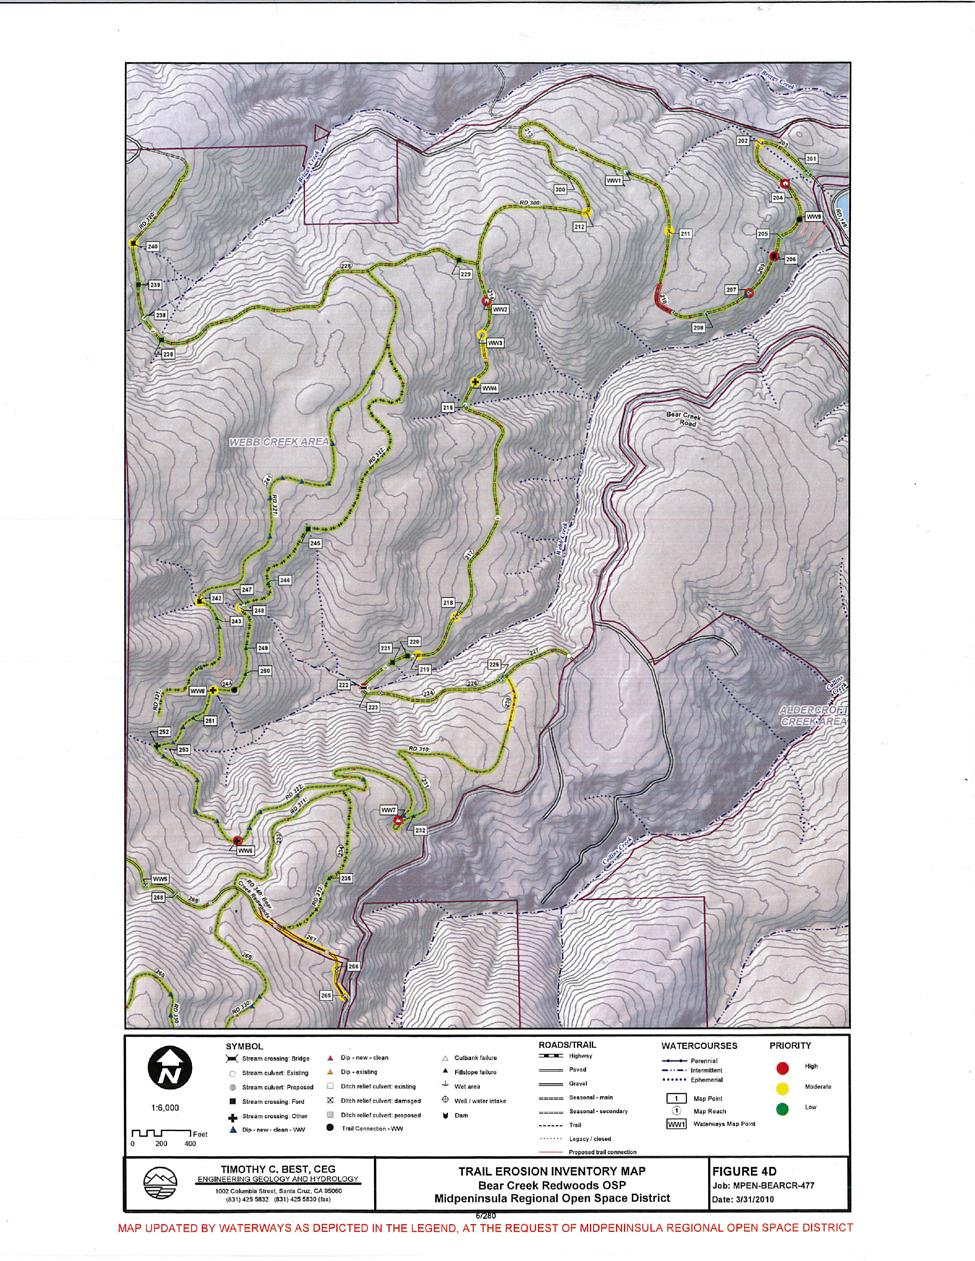 Overview of preserve trails and roads, Webb Creek